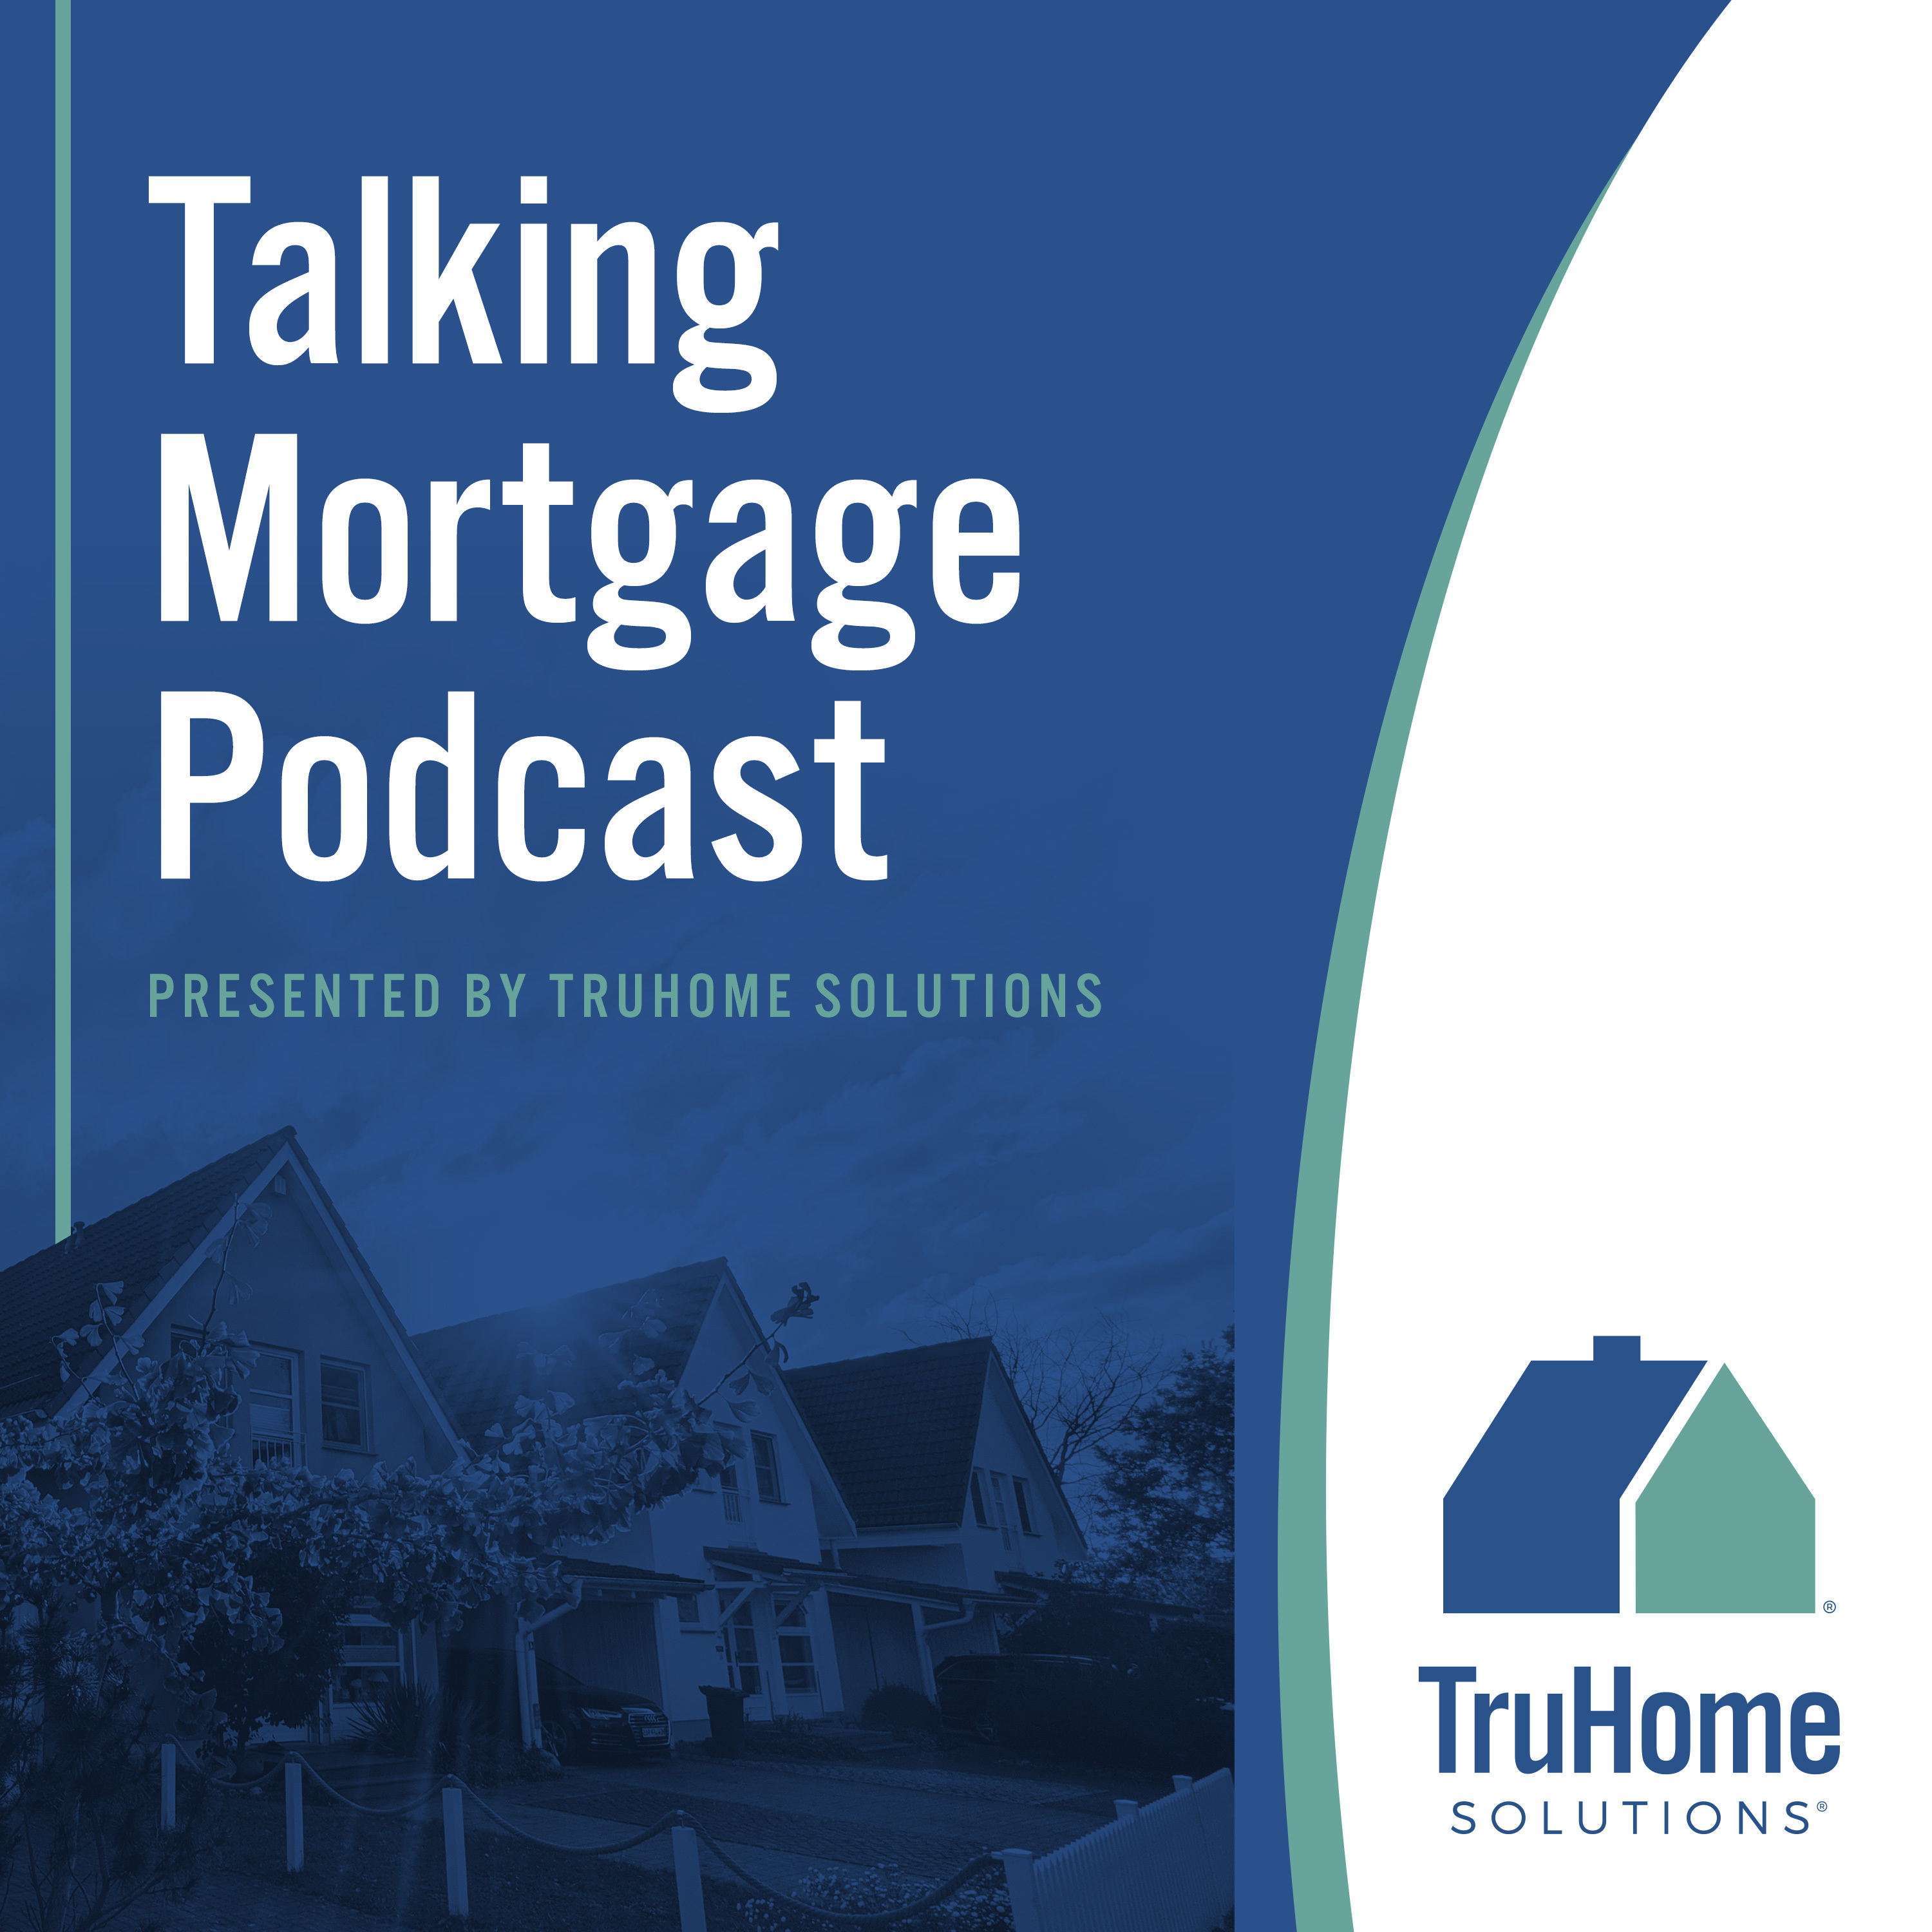 Talking Mortgage Podcast presented by TruHome Solutions